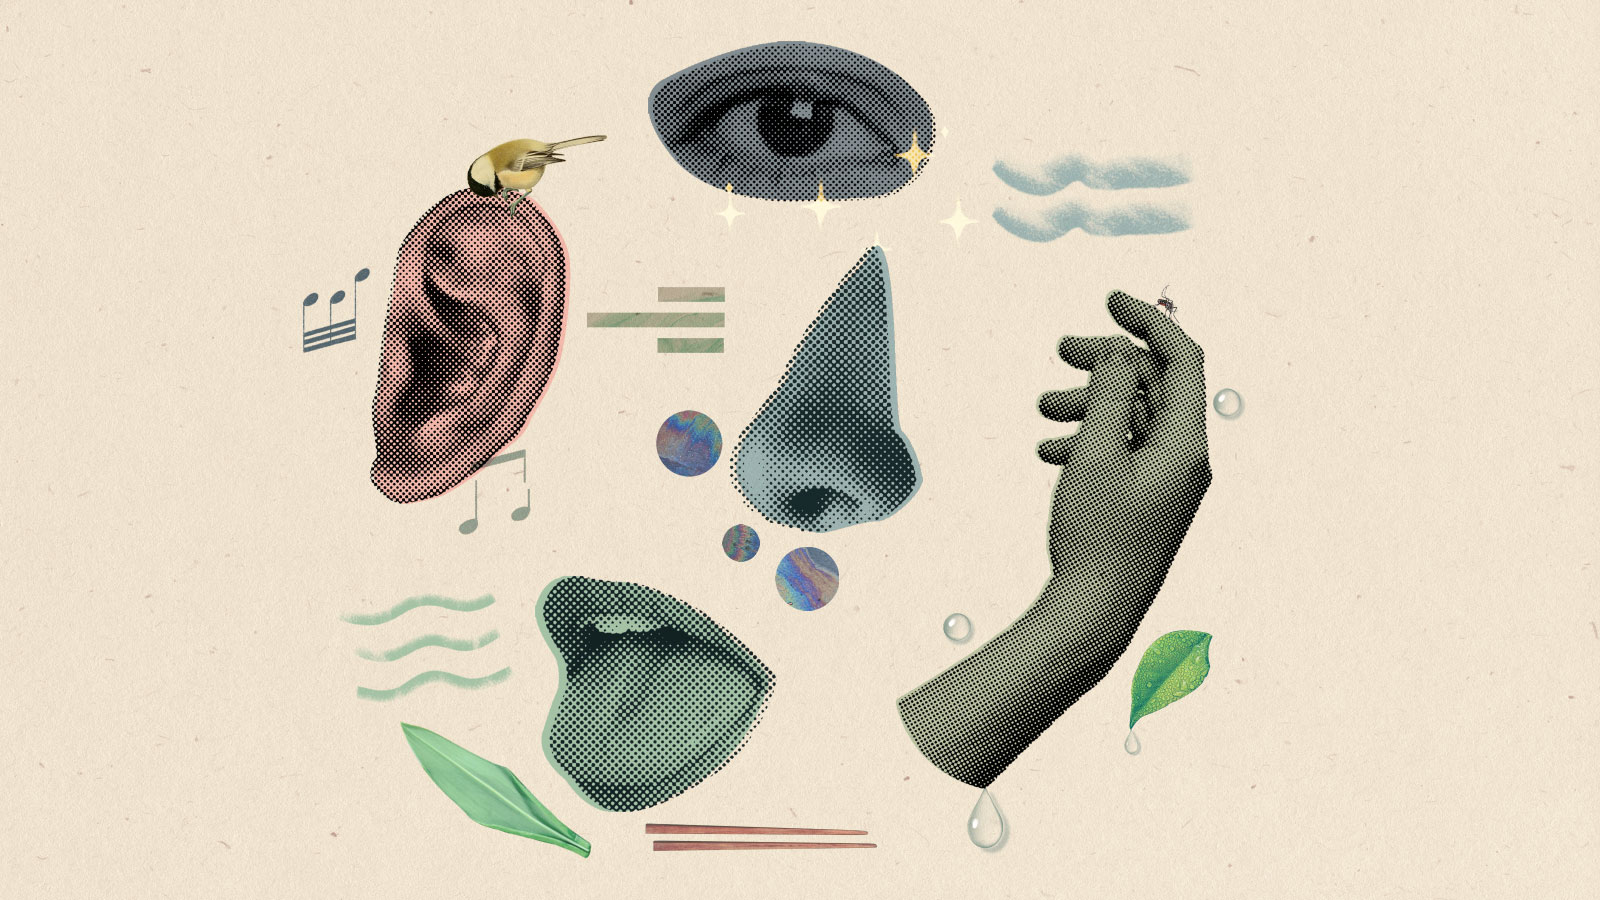 Collage: an eye, a hand, a nose, an open mouth, and an ear, surrounded by leaves, chopsticks, music notes, stars, and cutouts of oil slicks